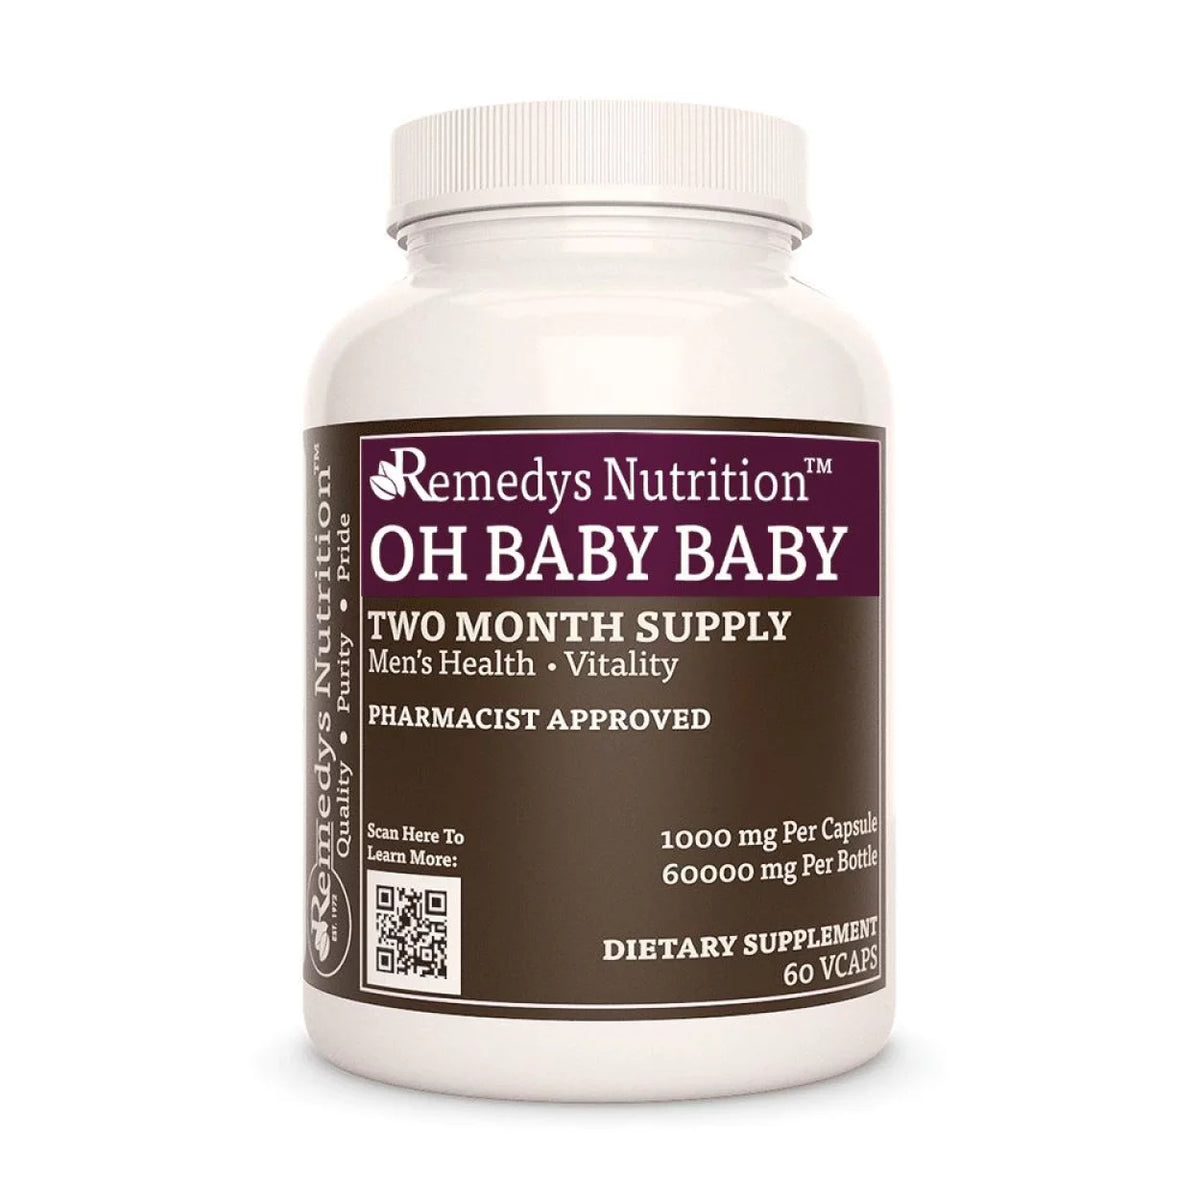 Image of Remedy's Nutrition® Oh Baby Baby™ Capsules Herbal Dietary Supplement bottle Made in USA Horny Goat Weed Men’s Health